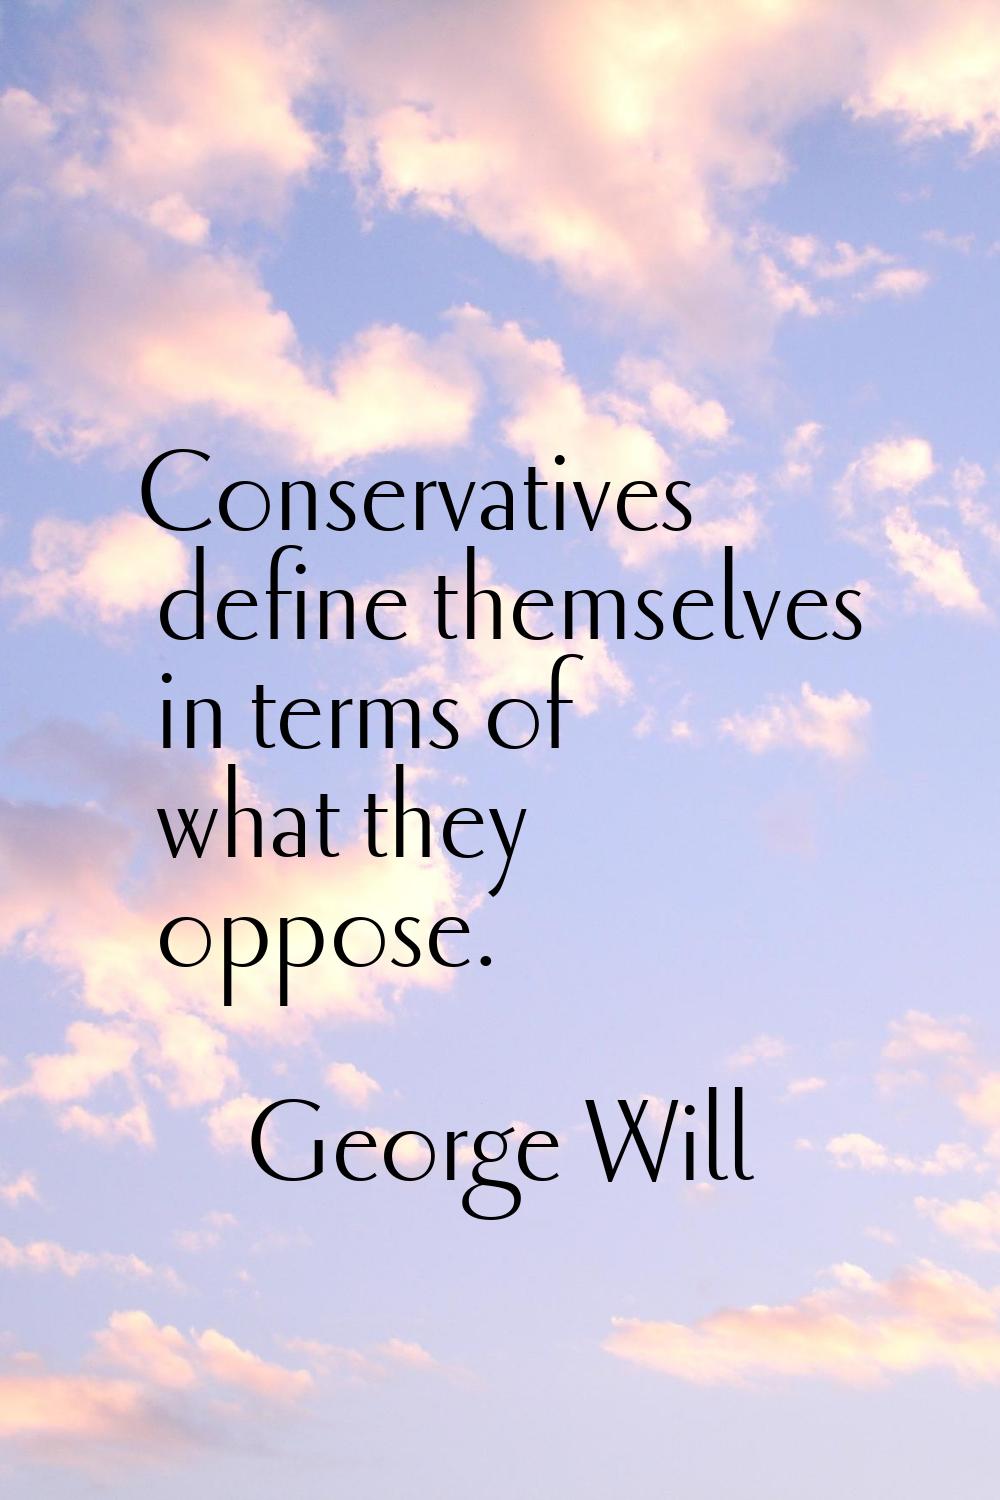 Conservatives define themselves in terms of what they oppose.